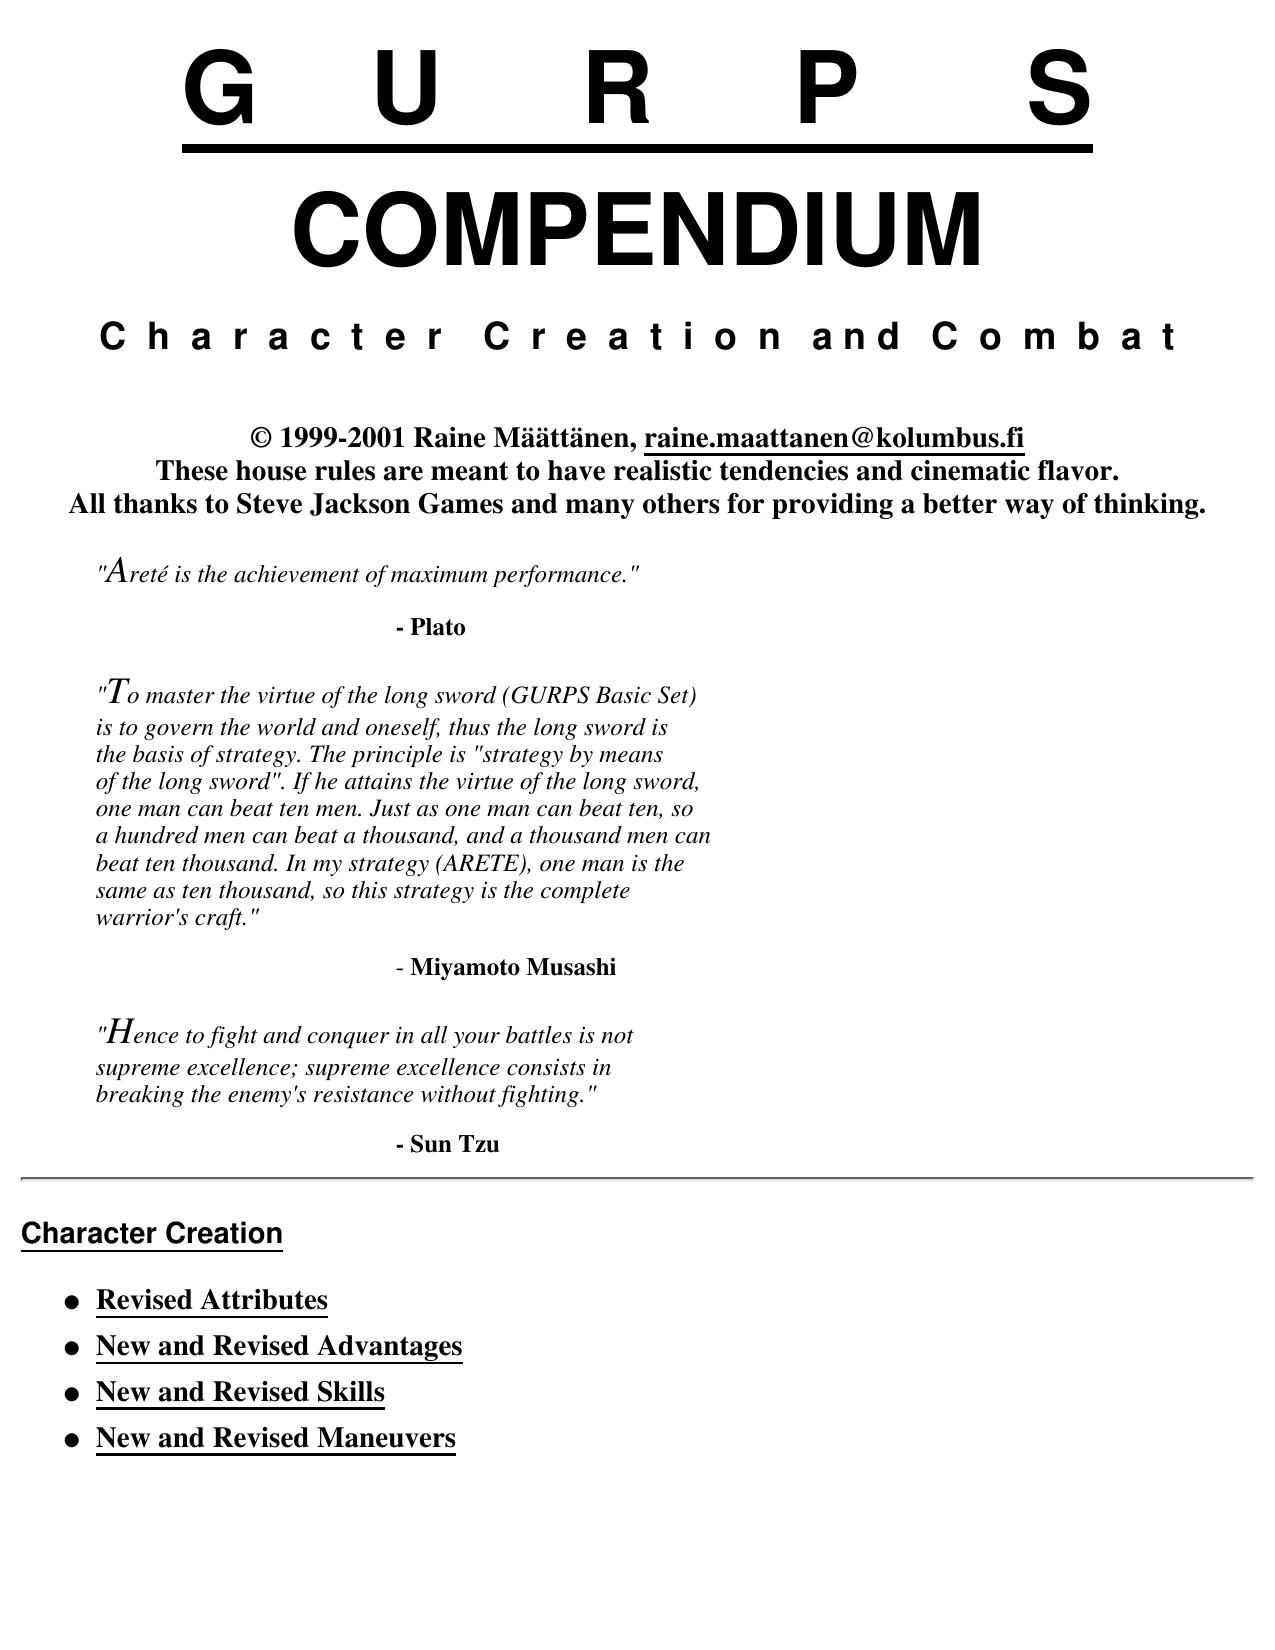 GURPS Compendium for Character Creation and Combat